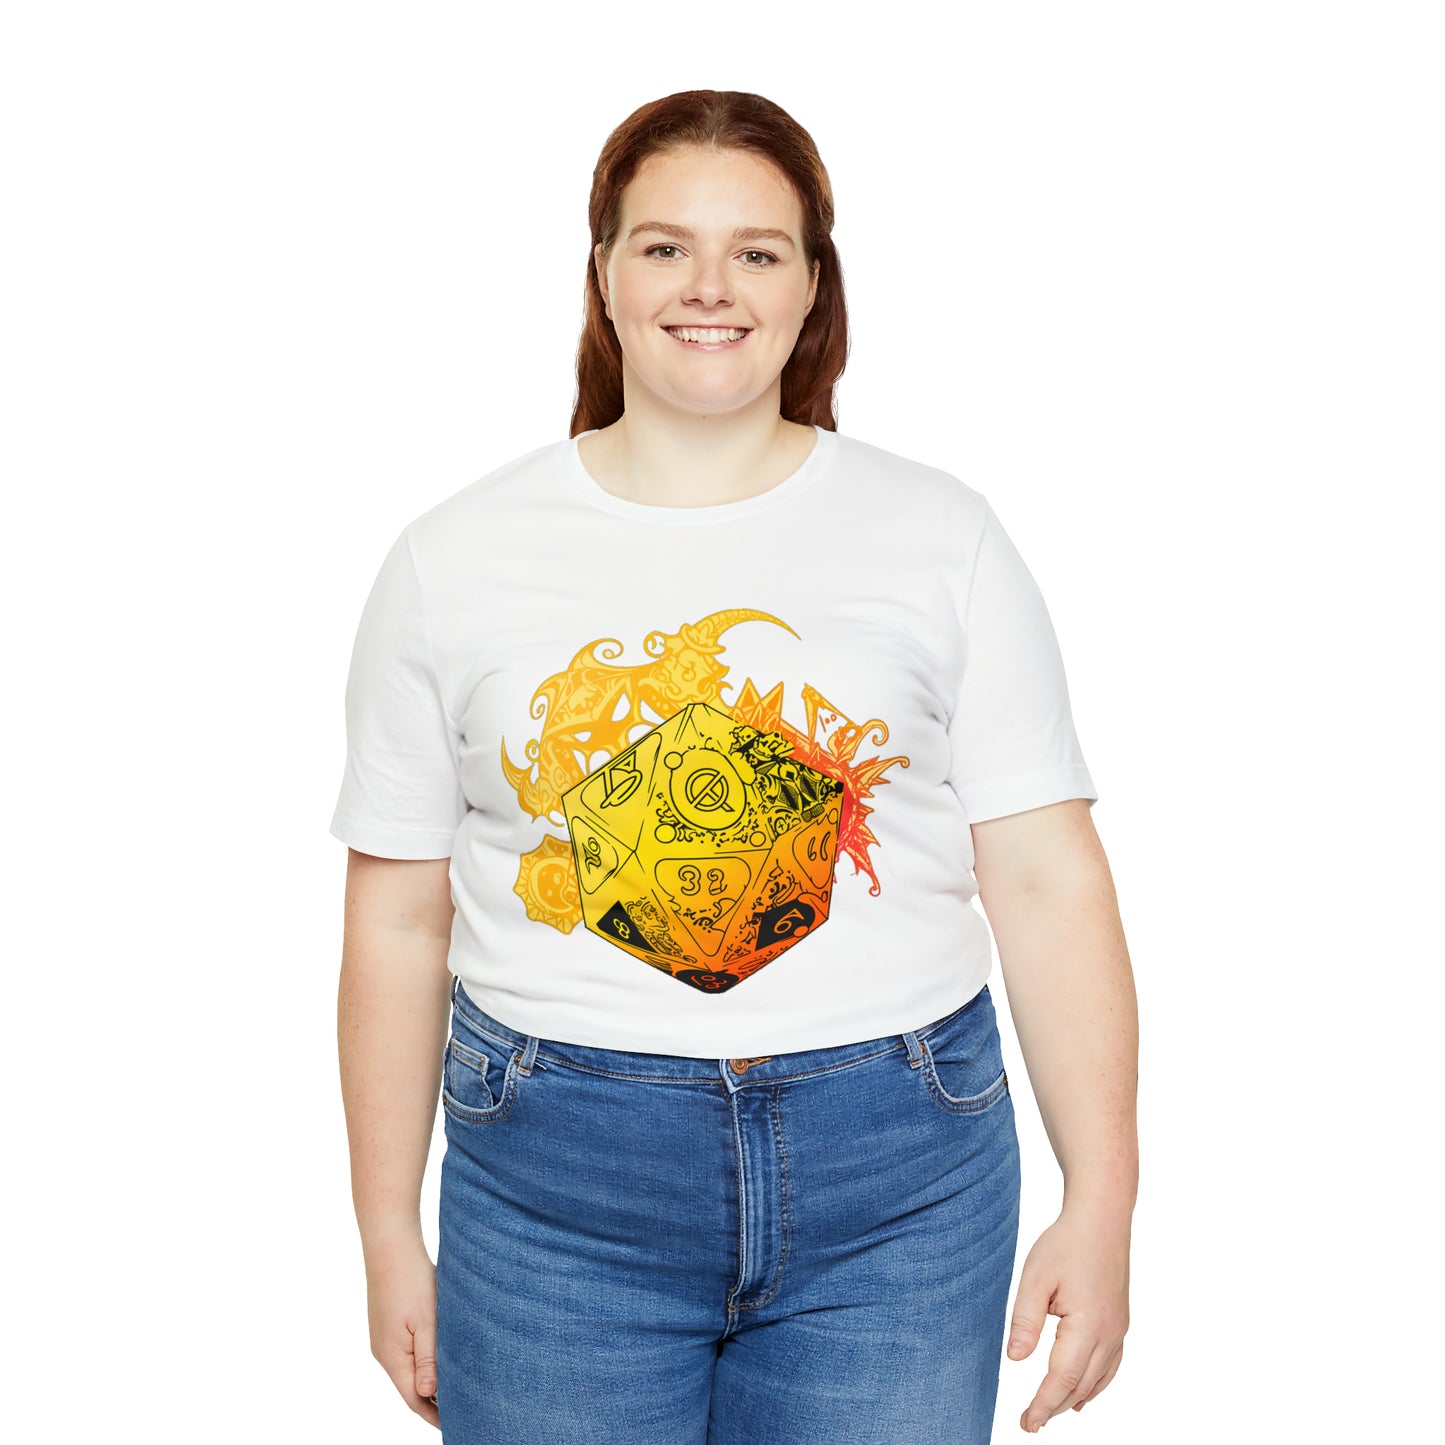 white-quest-thread-tee-shirt-with-large-yellow-dragon-dice-on-center-of-shirt